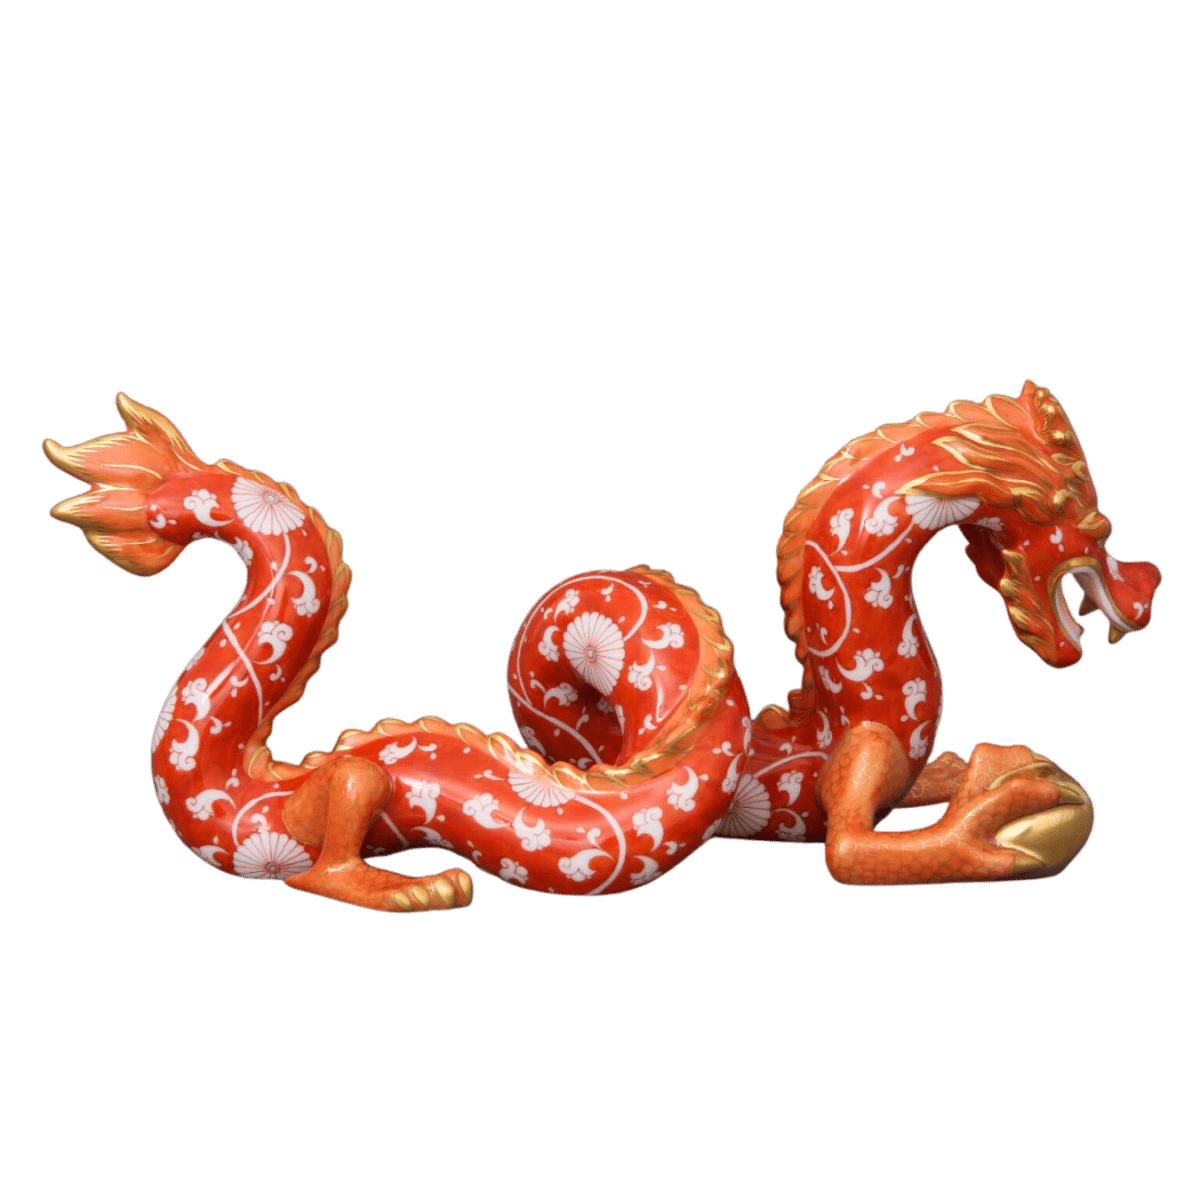 Herend-Porcelain-Dragon-Chiinese-Rust-15070-0-00CHRYS-1